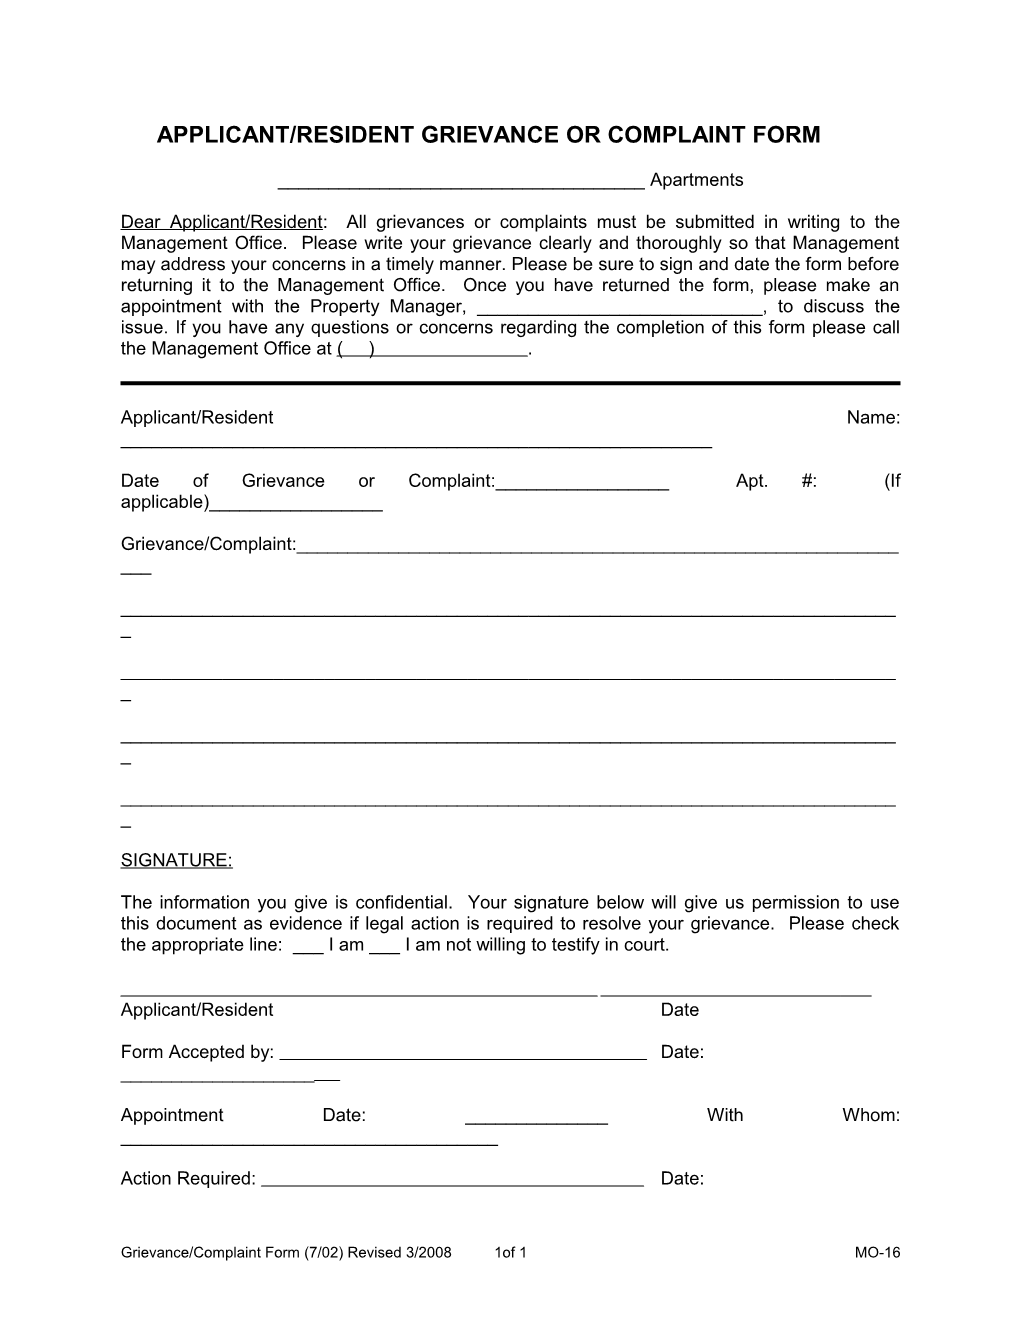 Applicant/Resident Grievance Or Complaint Form